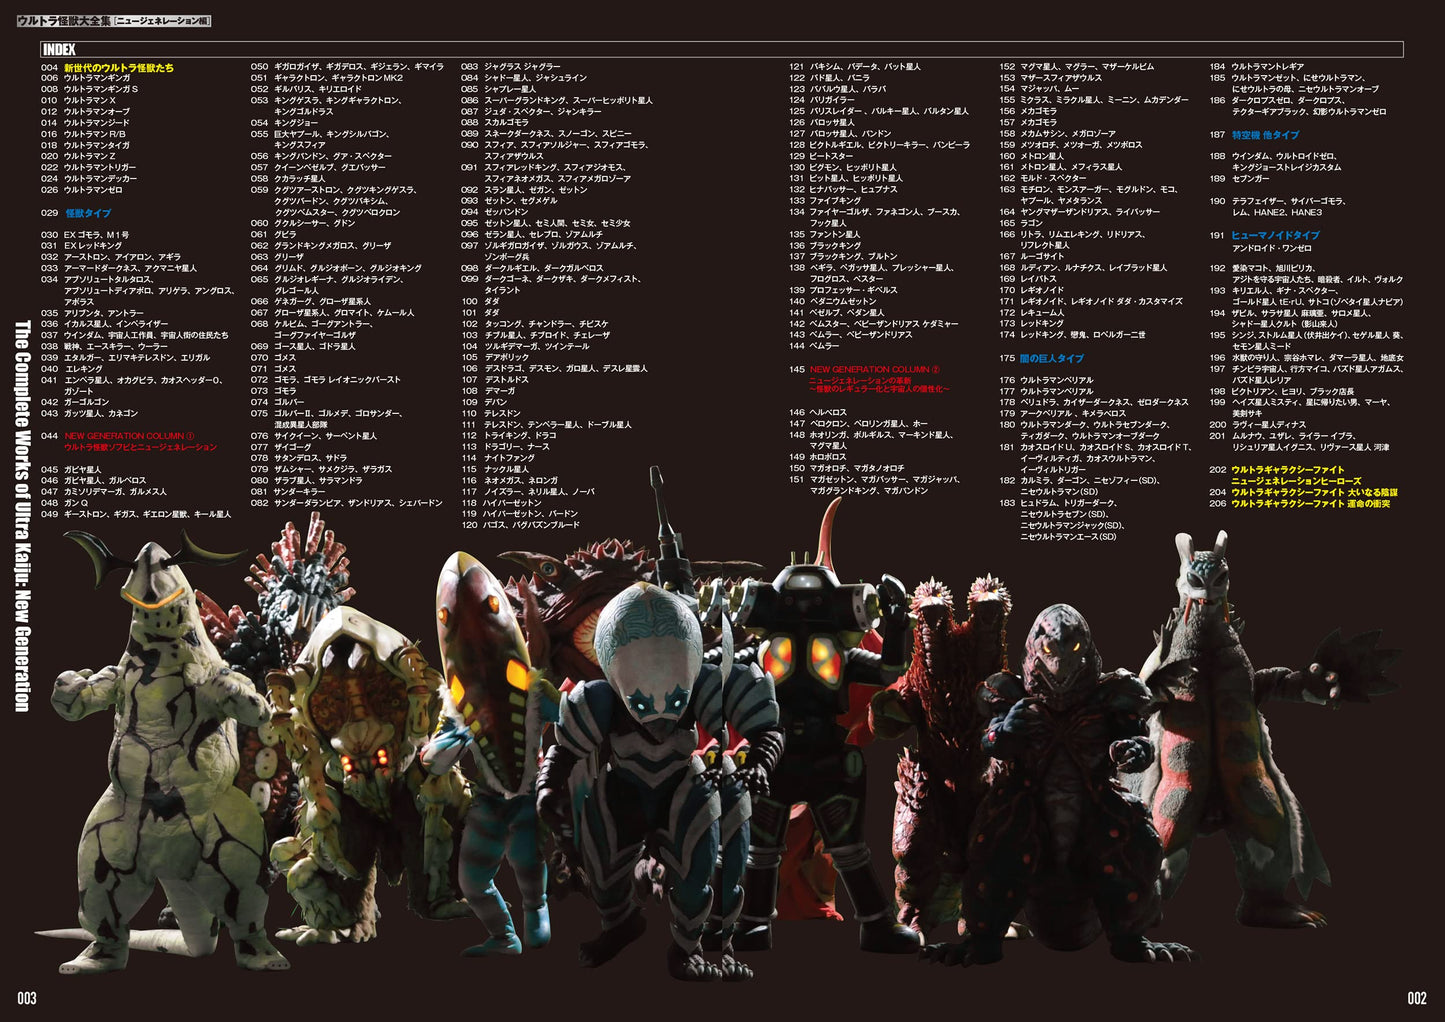 The Complete Works of Ultra Kaiju New Generation